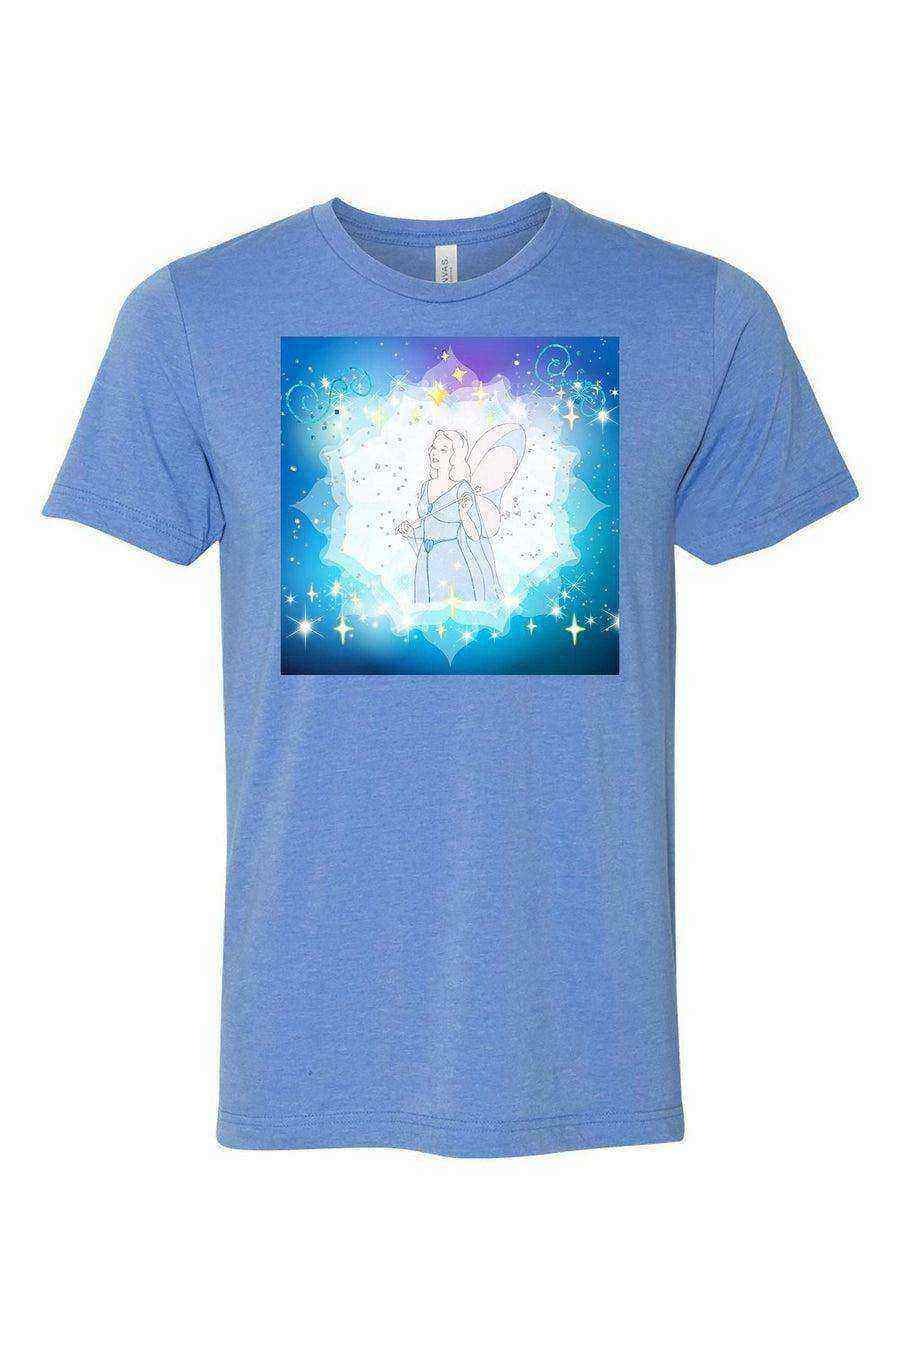 Womens | Blue Fairy Shirt | When You Wish Upon A Star - Dylan's Tees